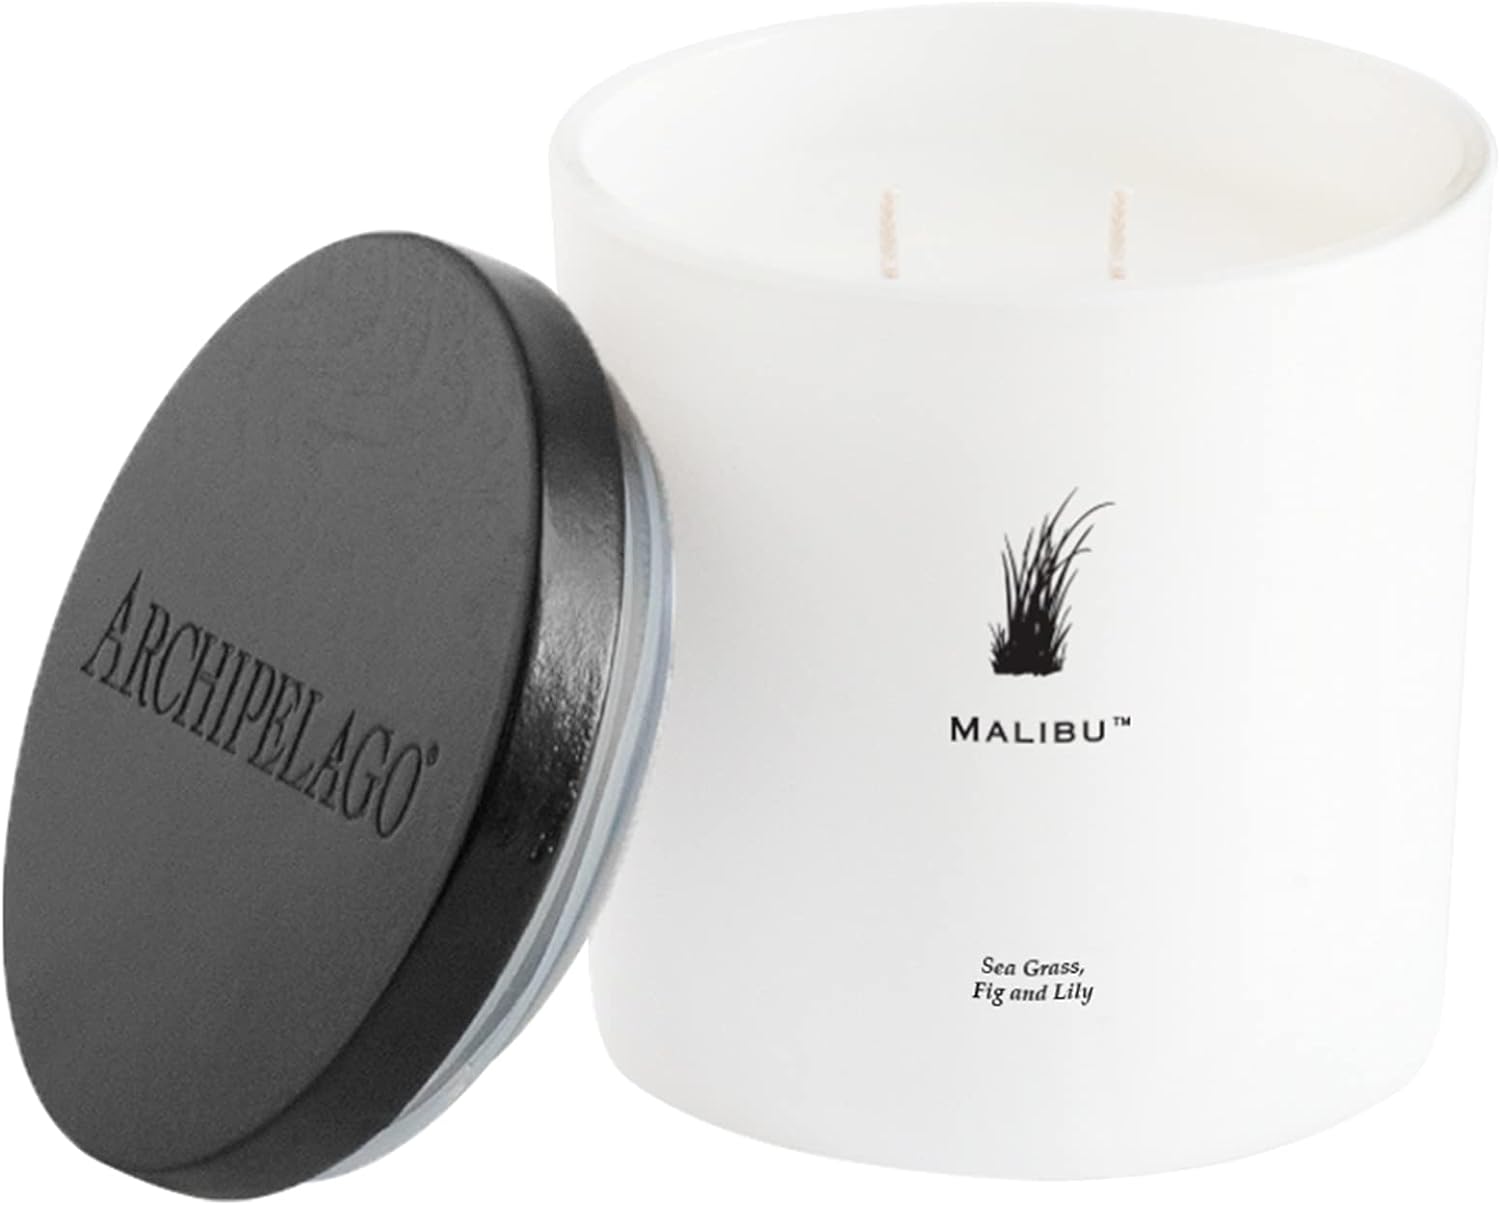 Archipelago Botanicals Malibu Luxe Candle. Spicy and Floral Scent of Sea Grass, Fig and Lily in an Elegant White Glass Jar. Coconut Wax and Double Wicks Burn 100 Hours (13 oz)